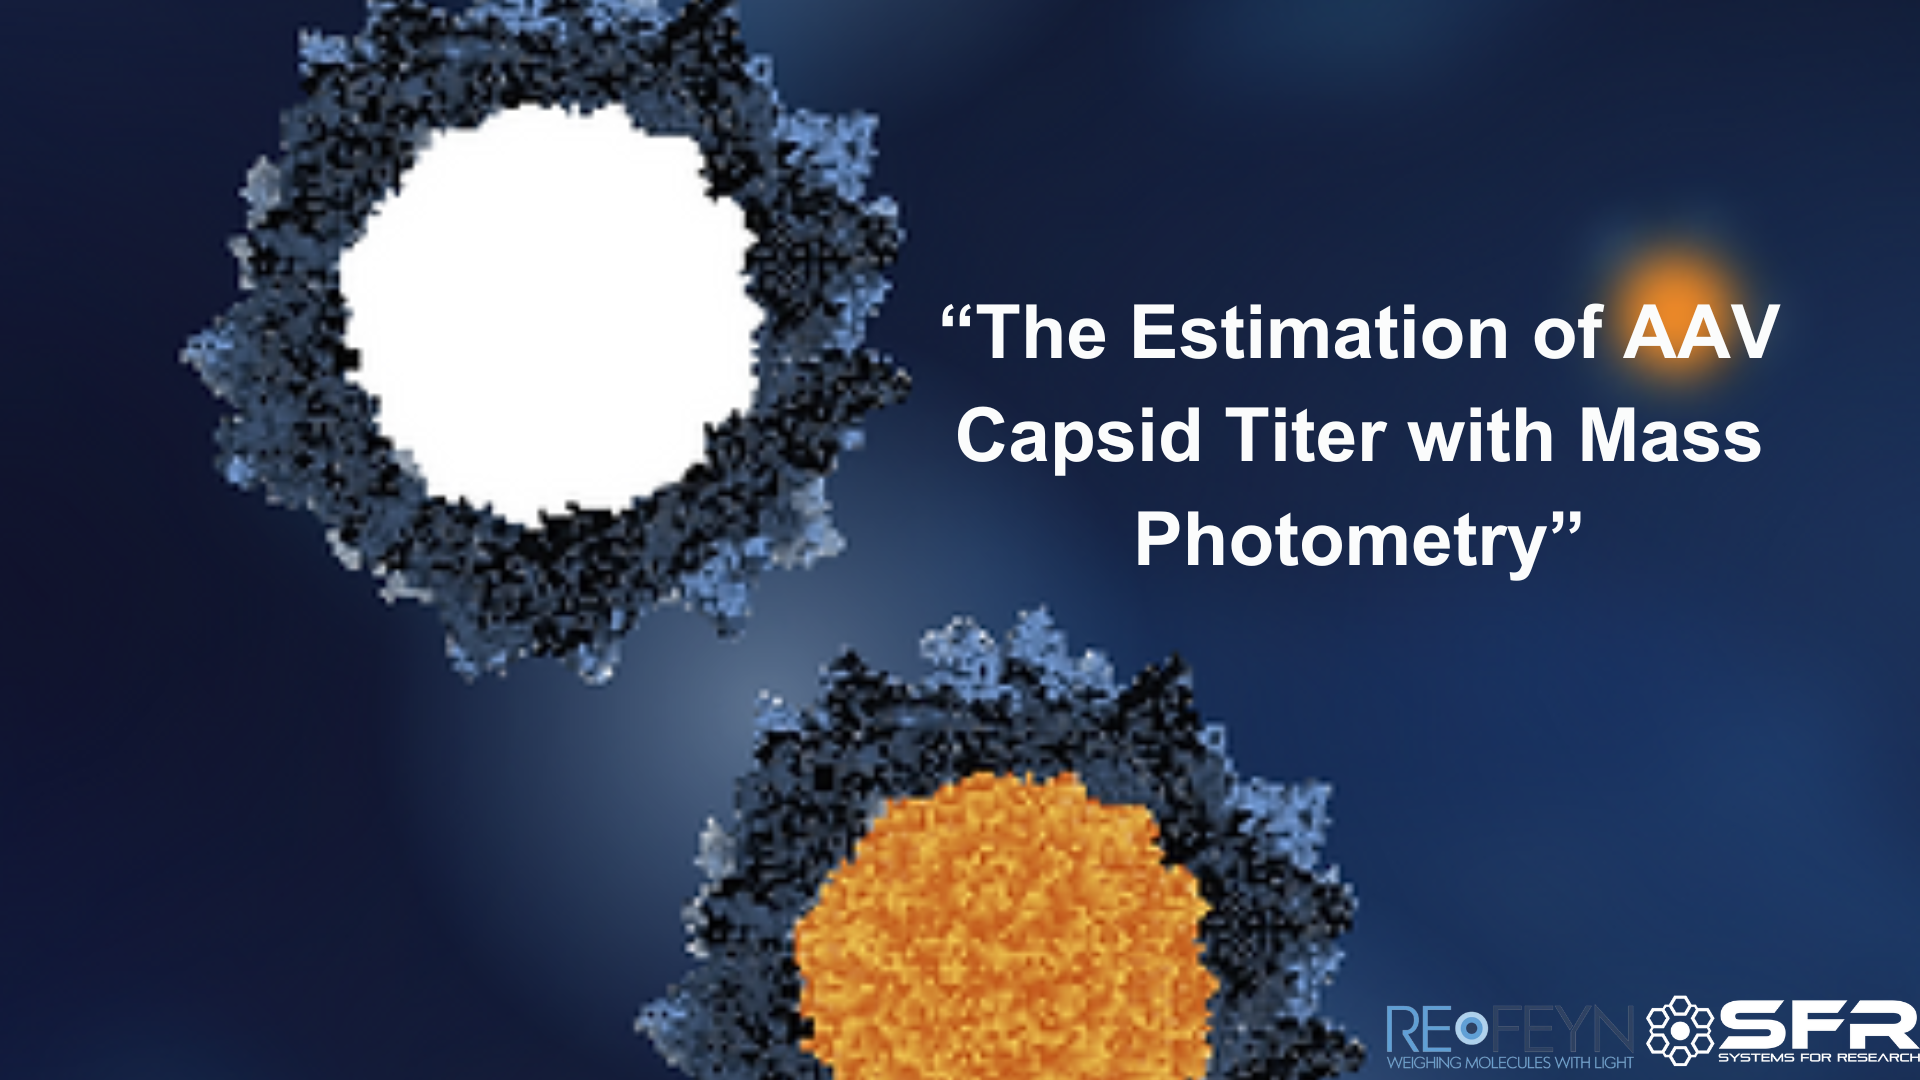 The Estimation of AAV Capsid Tier with Mass Photometry